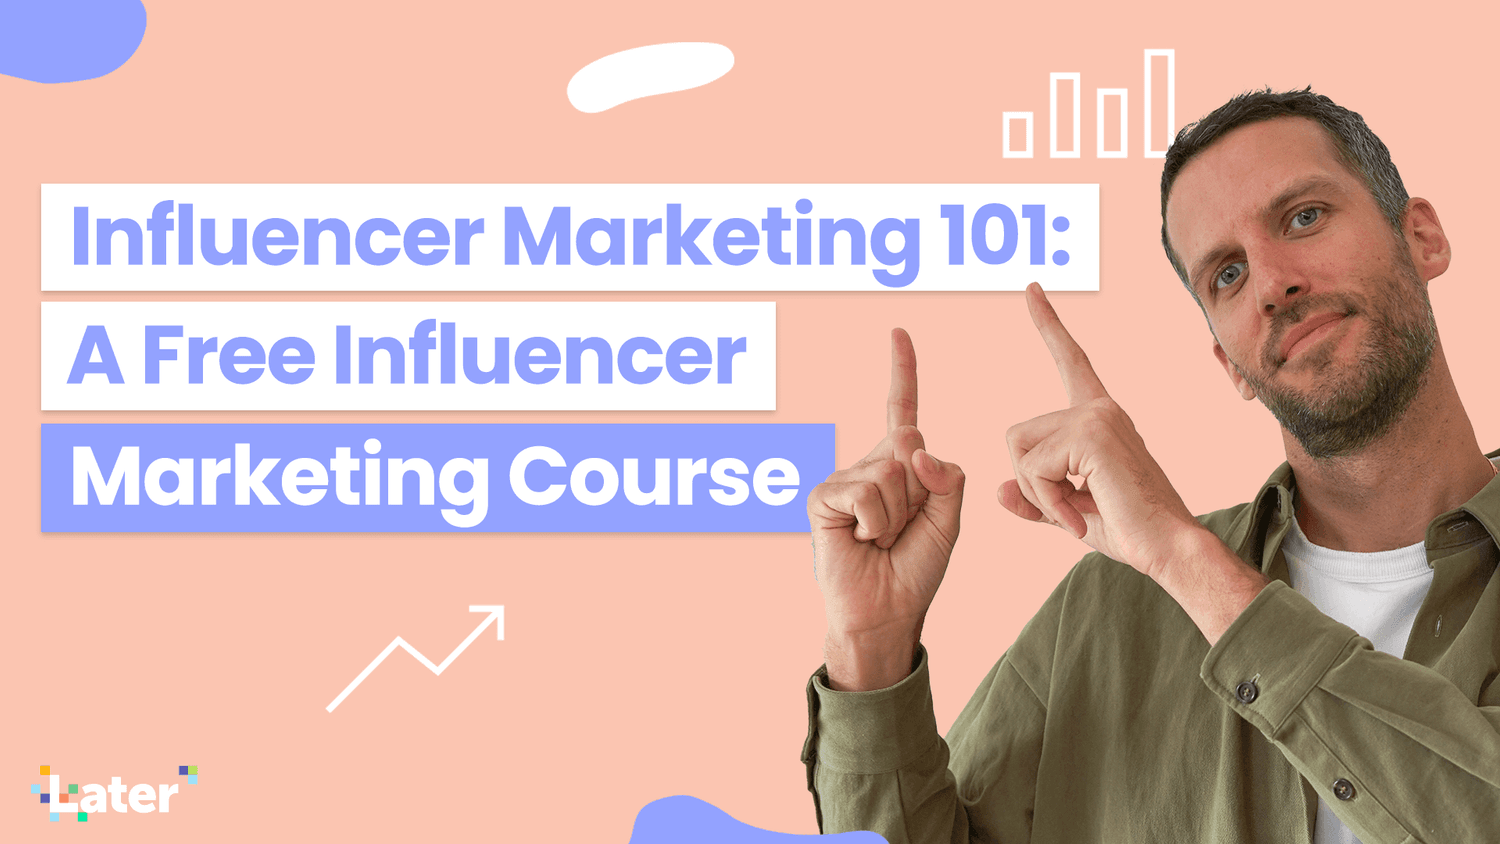 Kurtis Smeaton presents the Free Influencer Marketing 101 Course from Later